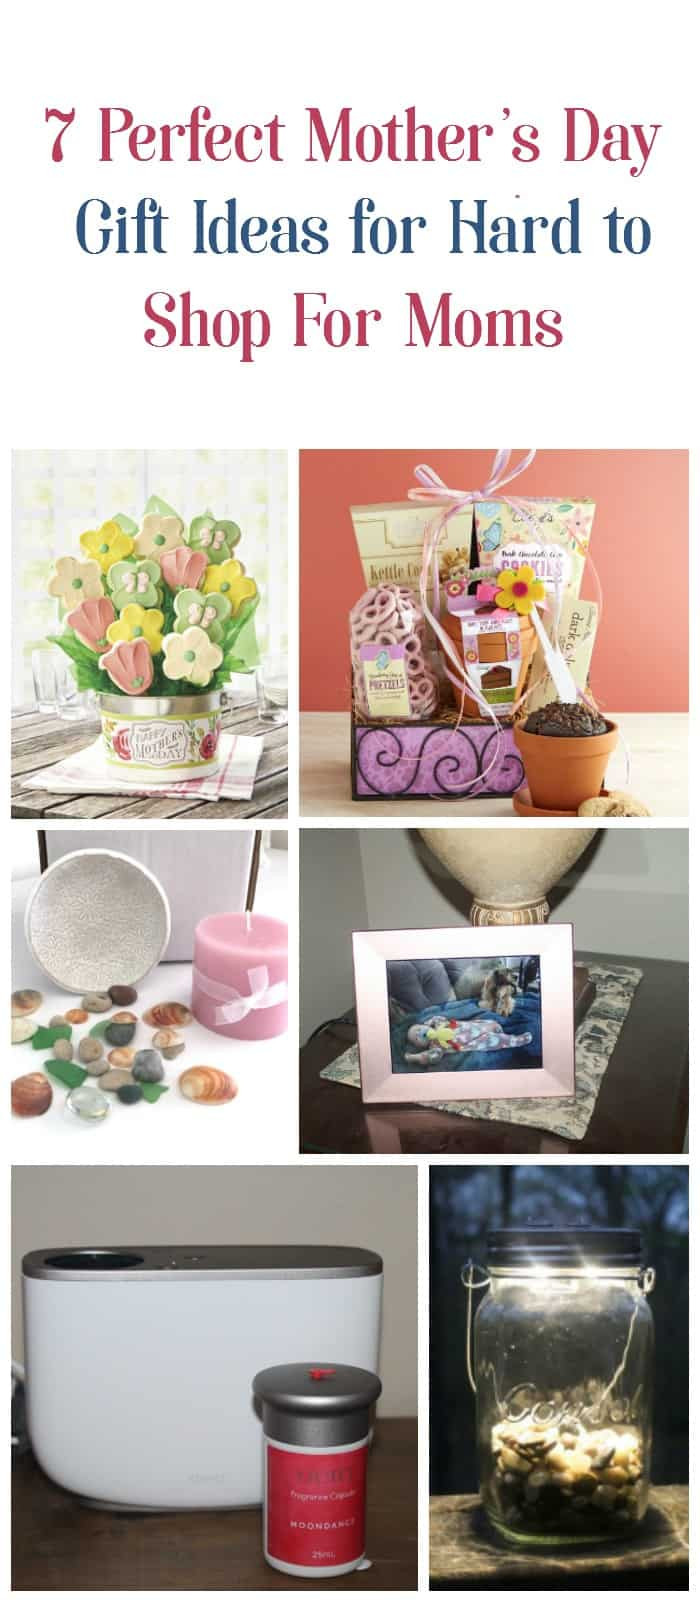 Creative Mothers Day Gift Ideas
 7 Perfectly Original Mother s Day Gifts for Moms Who Are